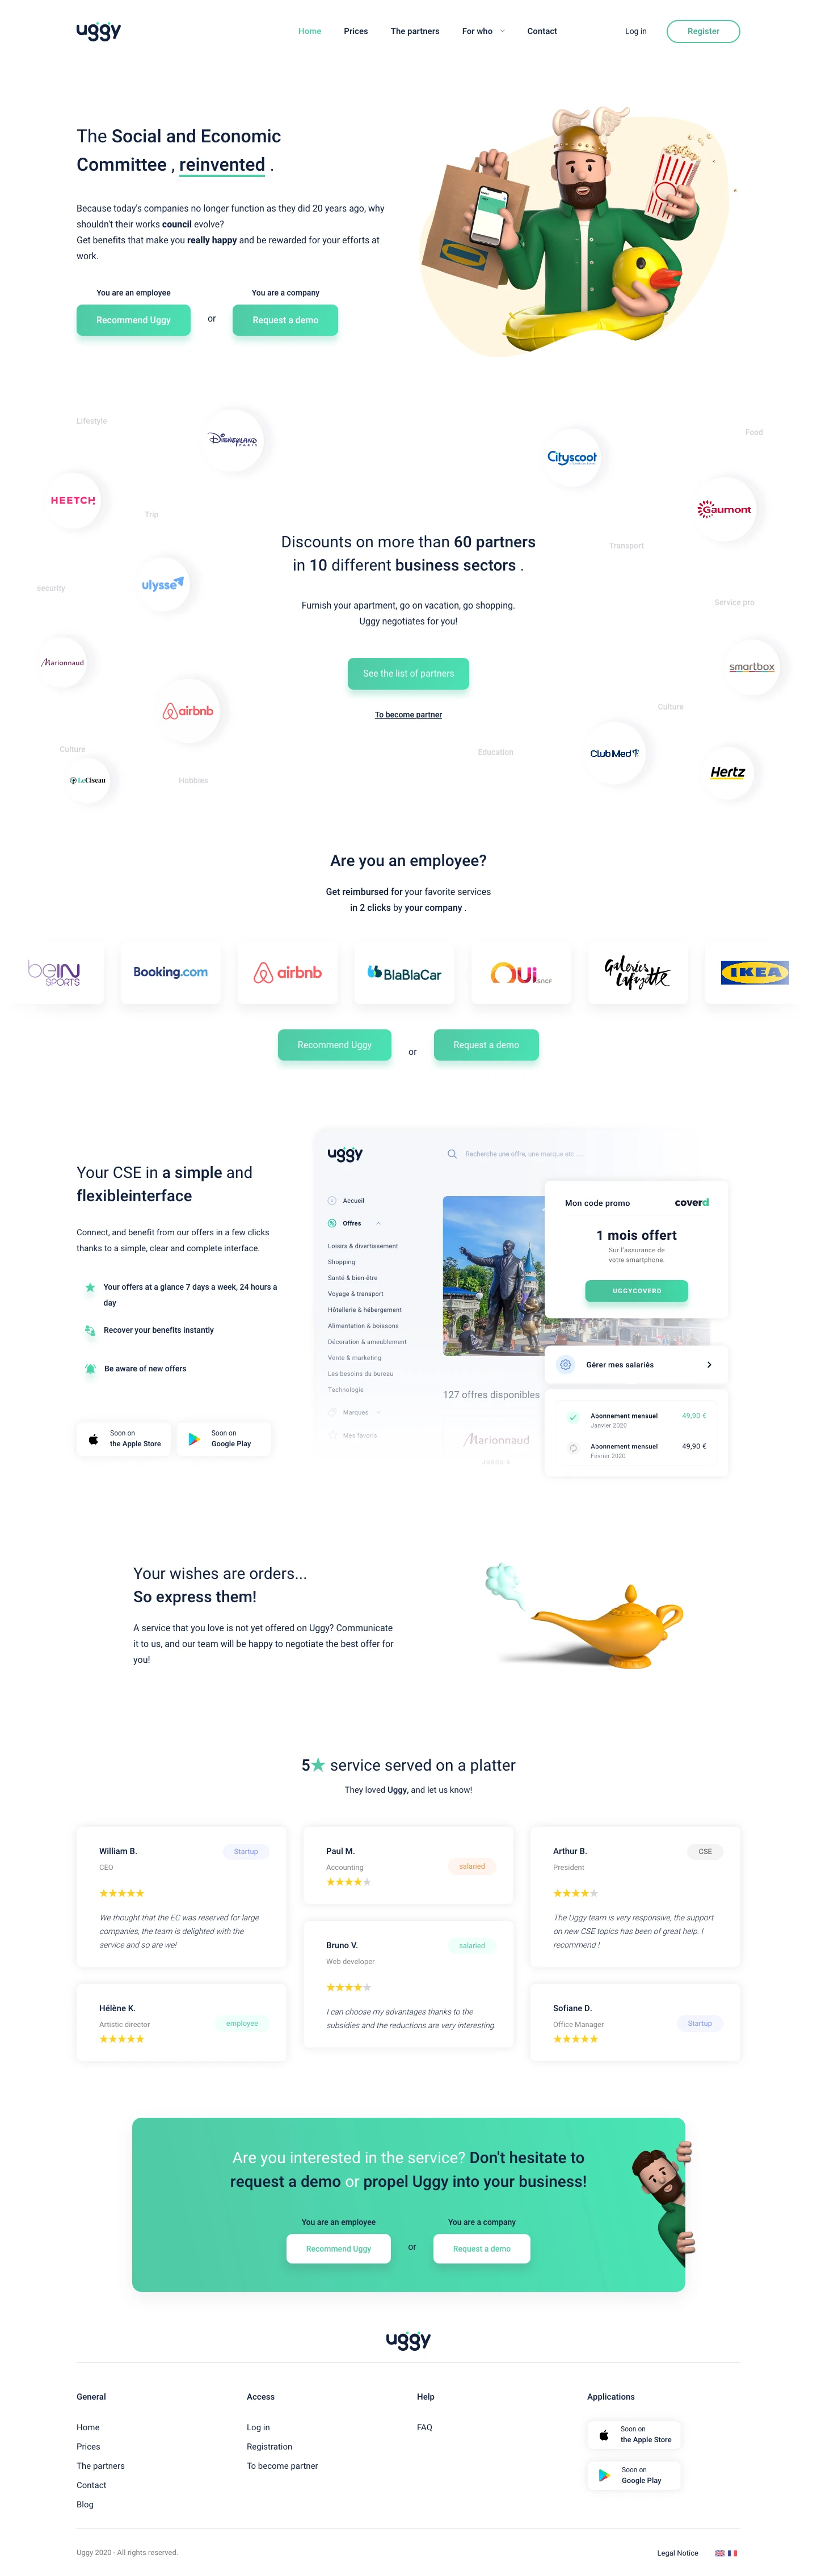 Uggy Landing Page Example: Uggy is made for freelancers, SMEs and startups who want to offer a large number of advantages to their members.